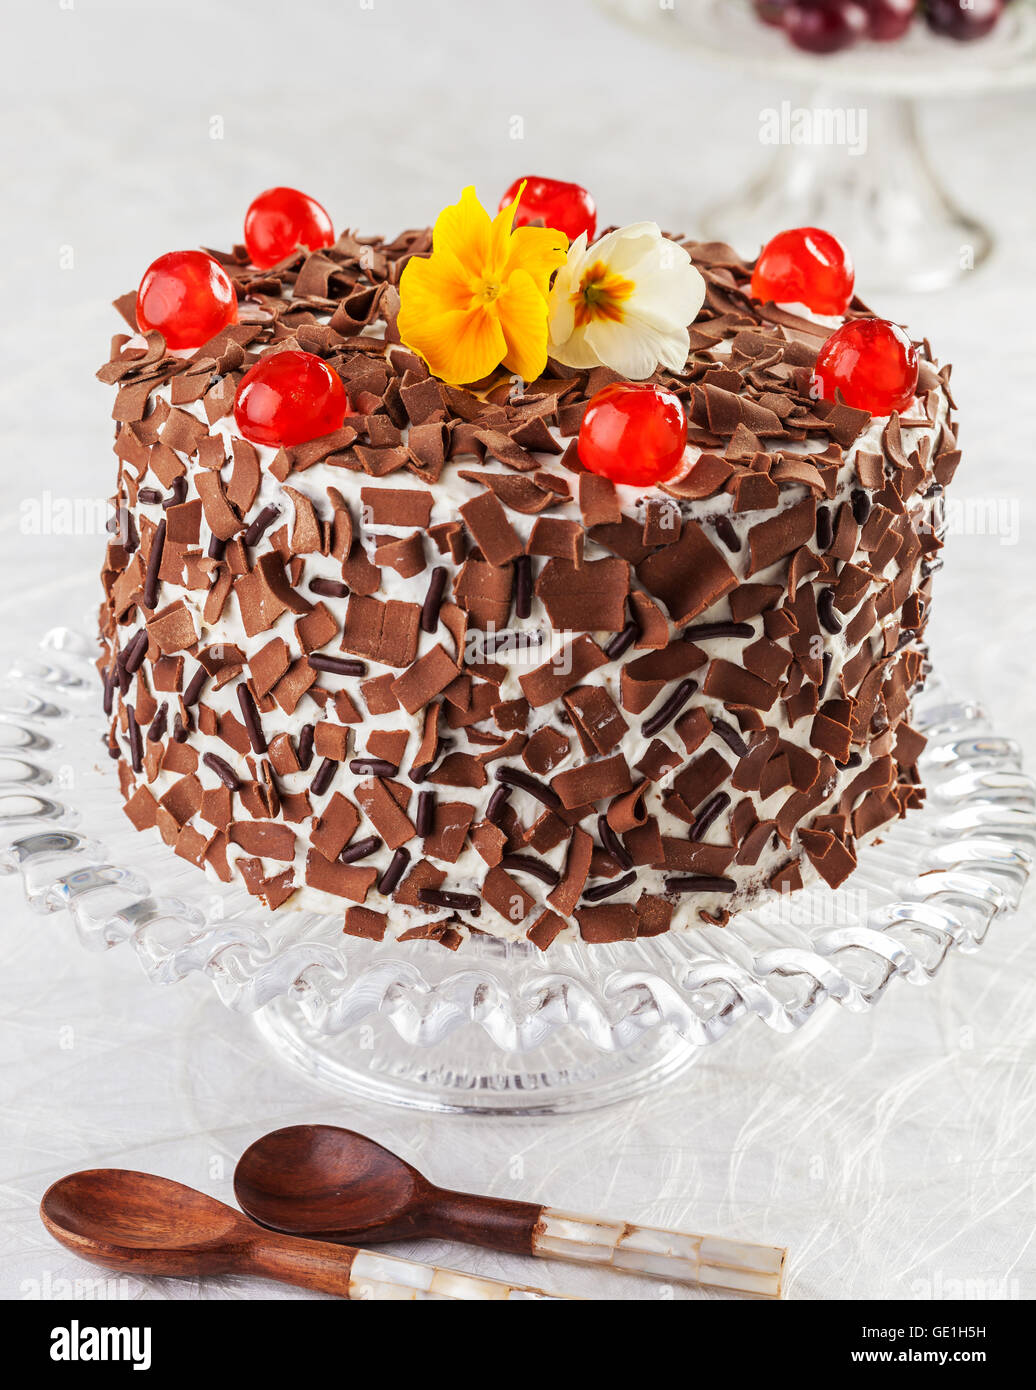 Black forest cake with cherries. Stock Photo